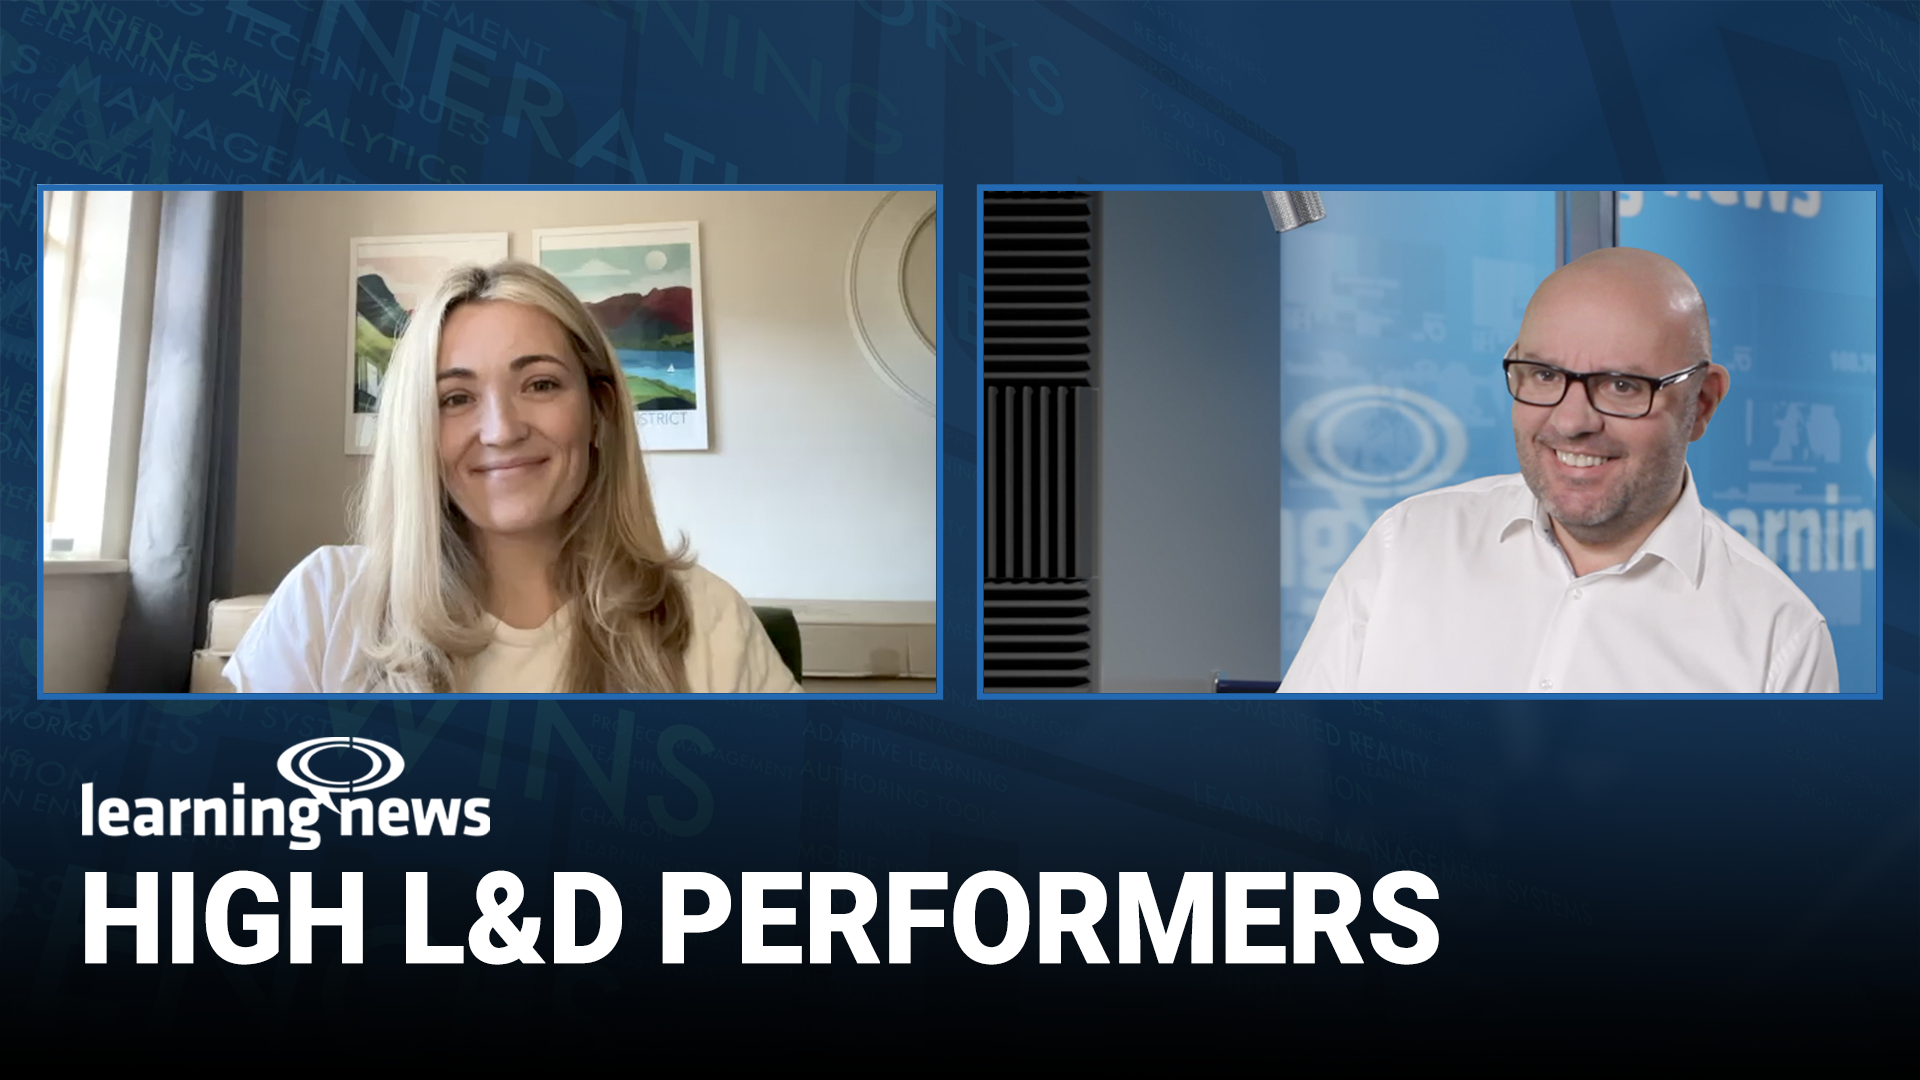 Anna Barnett, a researcher who works on the Learning Performance Benchmark from Mind Tools For Business, joins Learning News to discuss high performing L&D teams